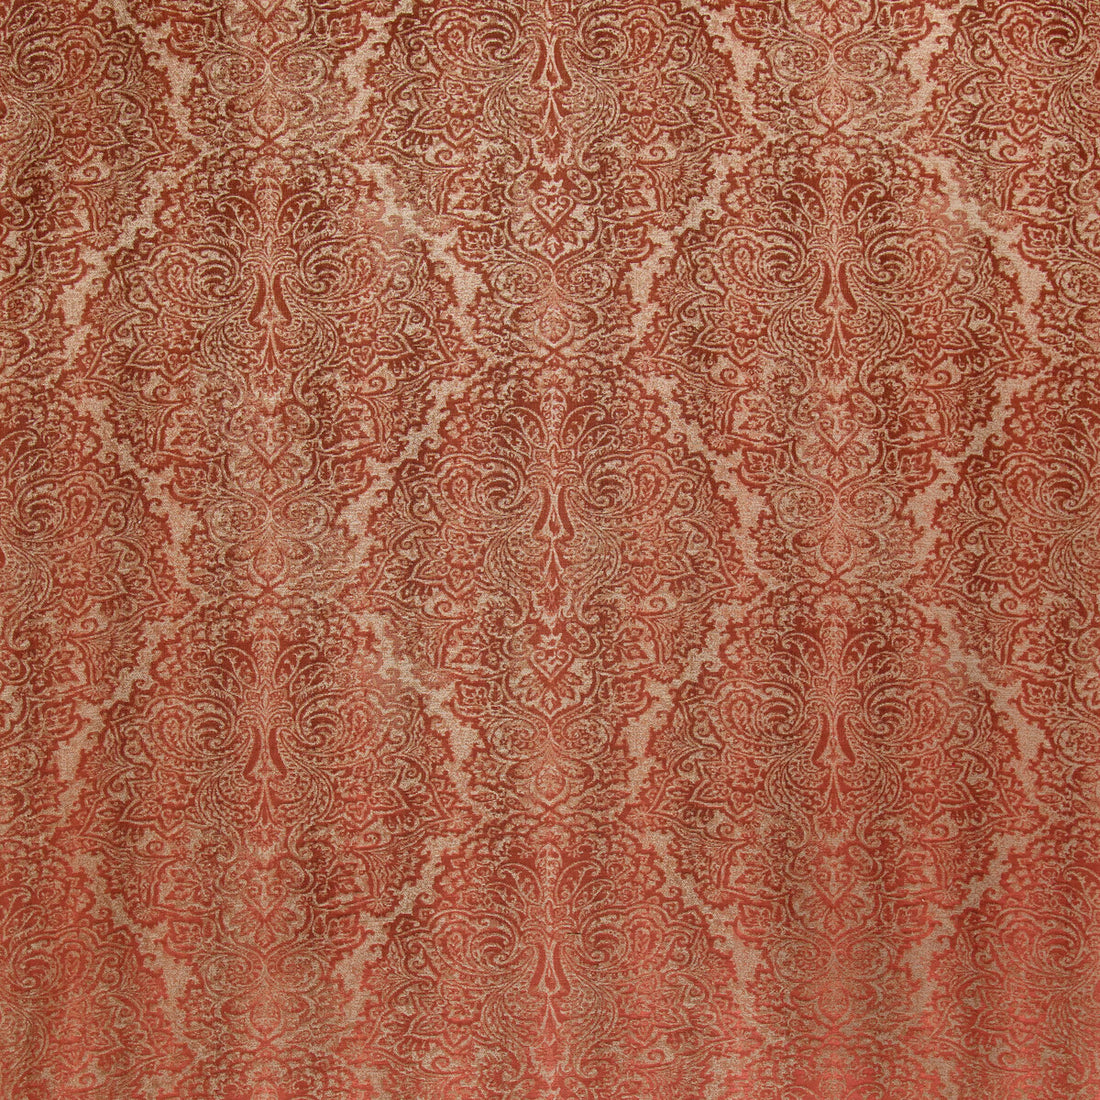 Shaw Damask fabric in garnet color - pattern 2019104.19.0 - by Lee Jofa in the Manor House collection